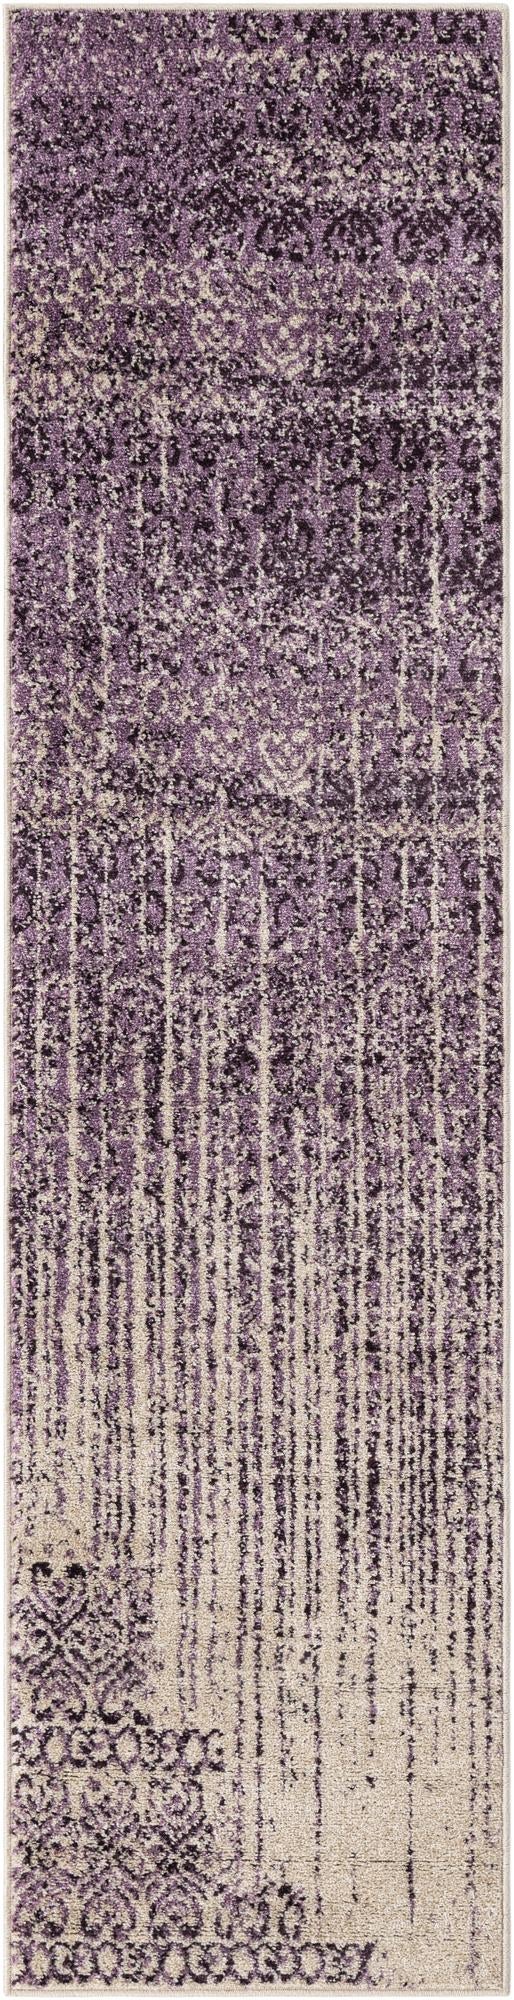 rugpal desdemona solid/striped area rug collection